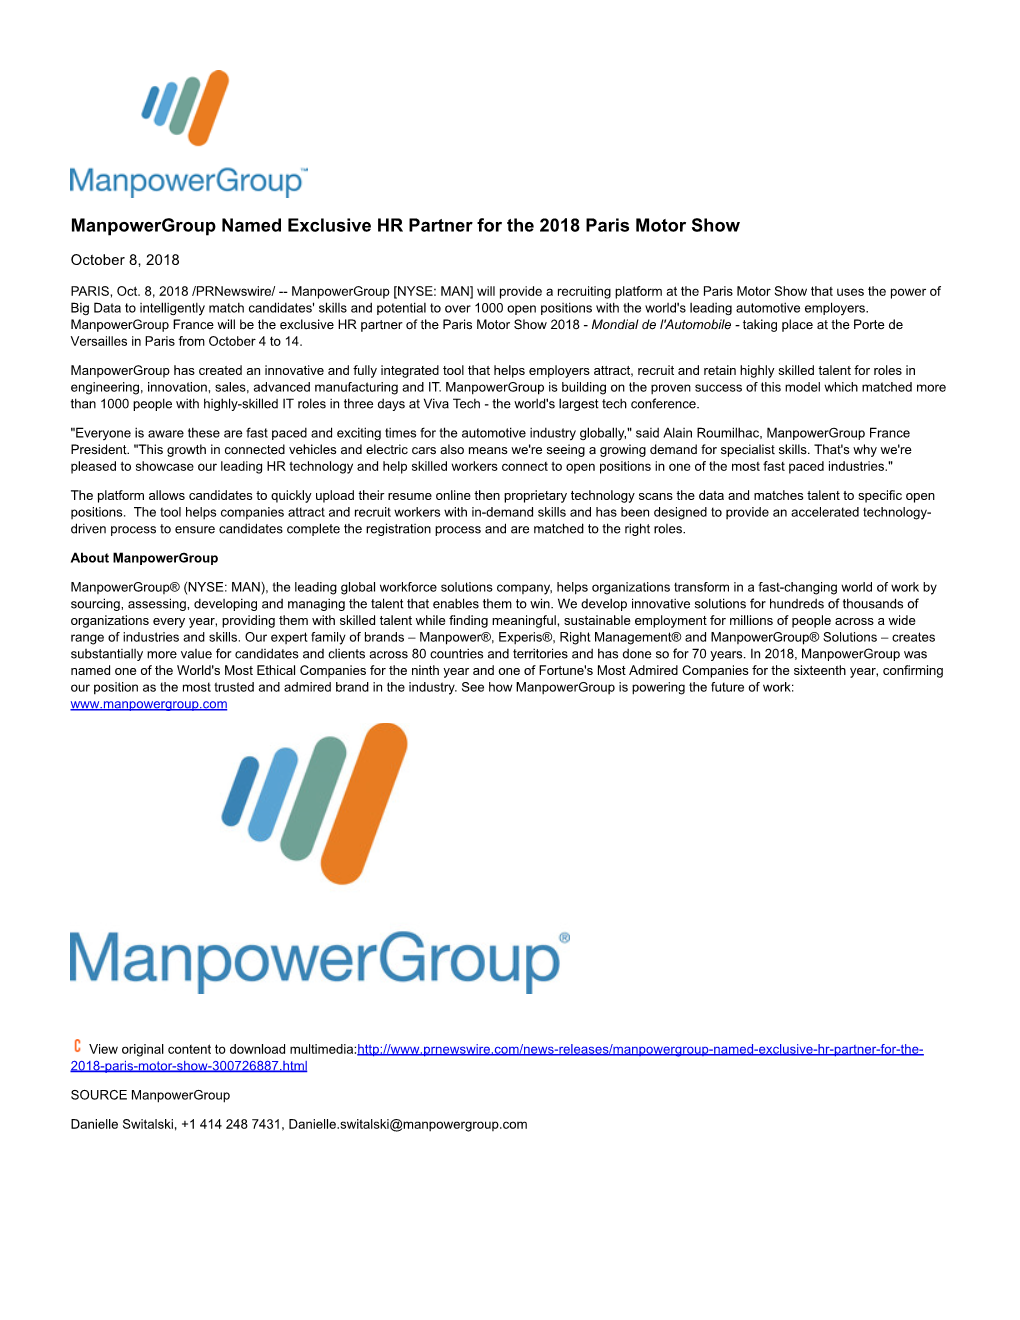 Manpowergroup Named Exclusive HR Partner for the 2018 Paris Motor Show